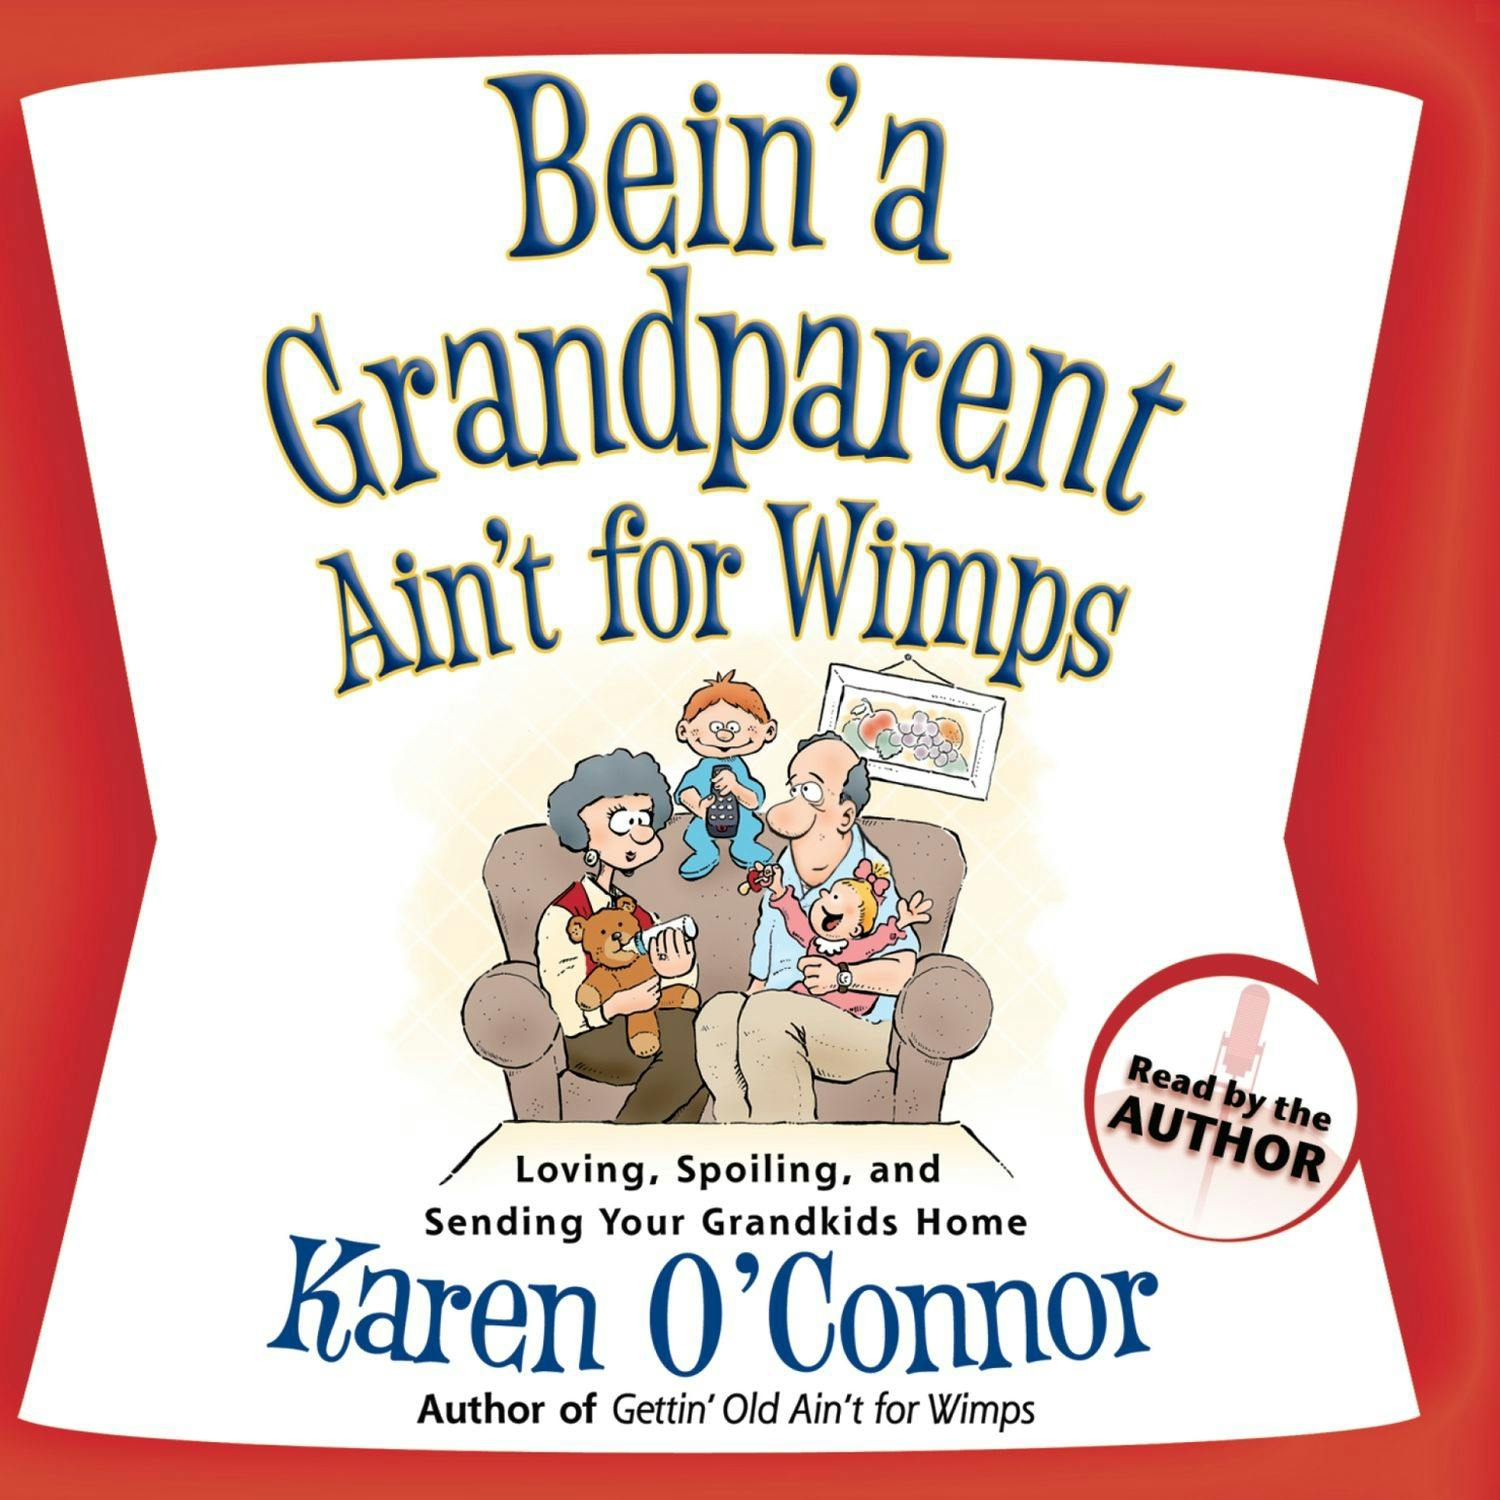 Bein' a Grandparent Ain't for Wimps: Loving, Spoiling, and Sending Your Grandkids Home - Karen O'Connor